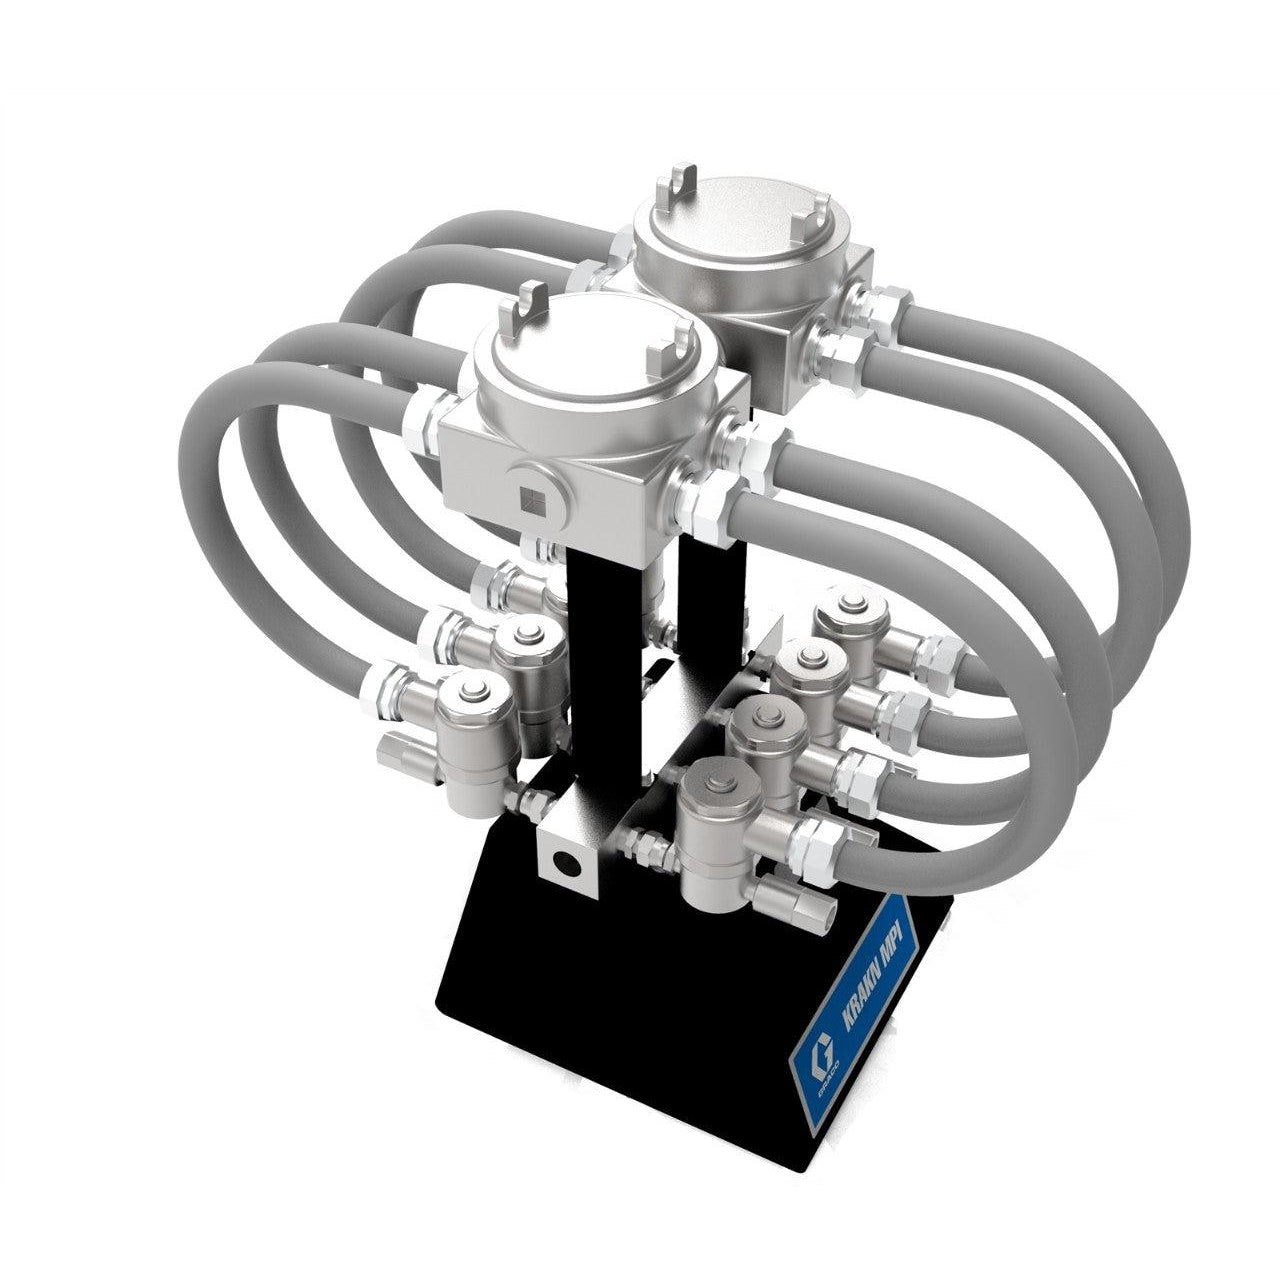 8 valve KRAKN MPI fluid manifold assembly, Class 1, Division 1 approved for Hazardous Locations